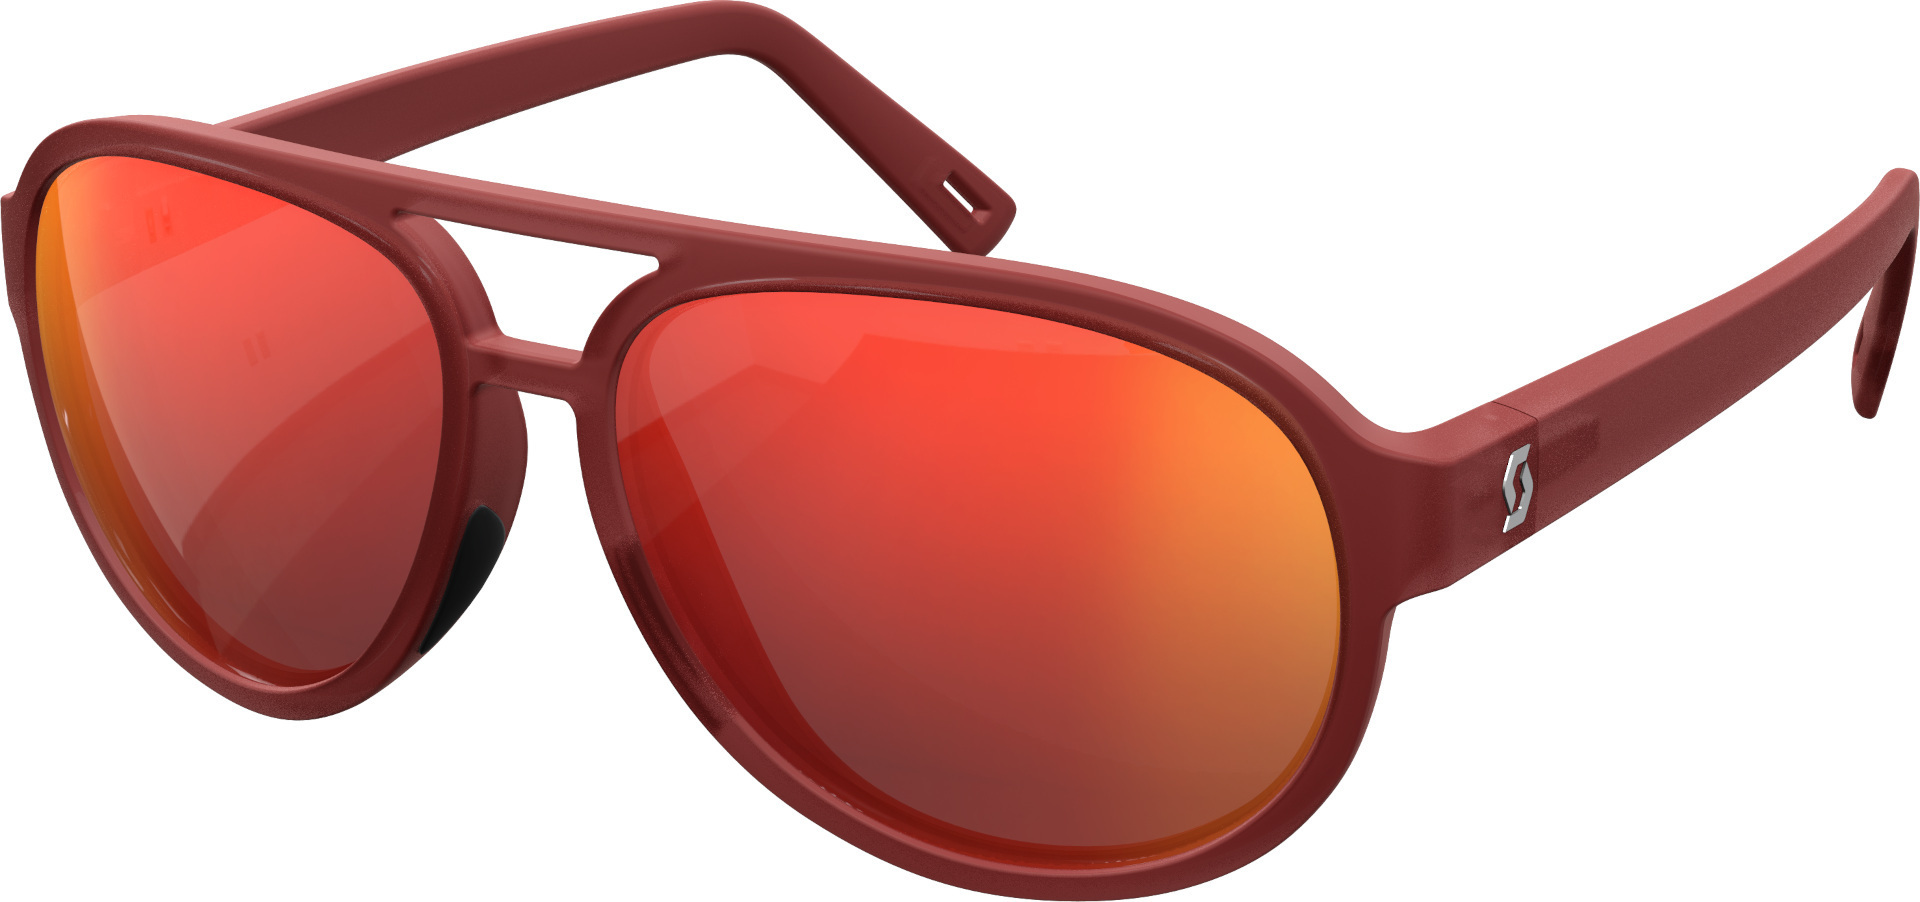 Scott Bass Chrome Sunglasses, red, red, Size One Size